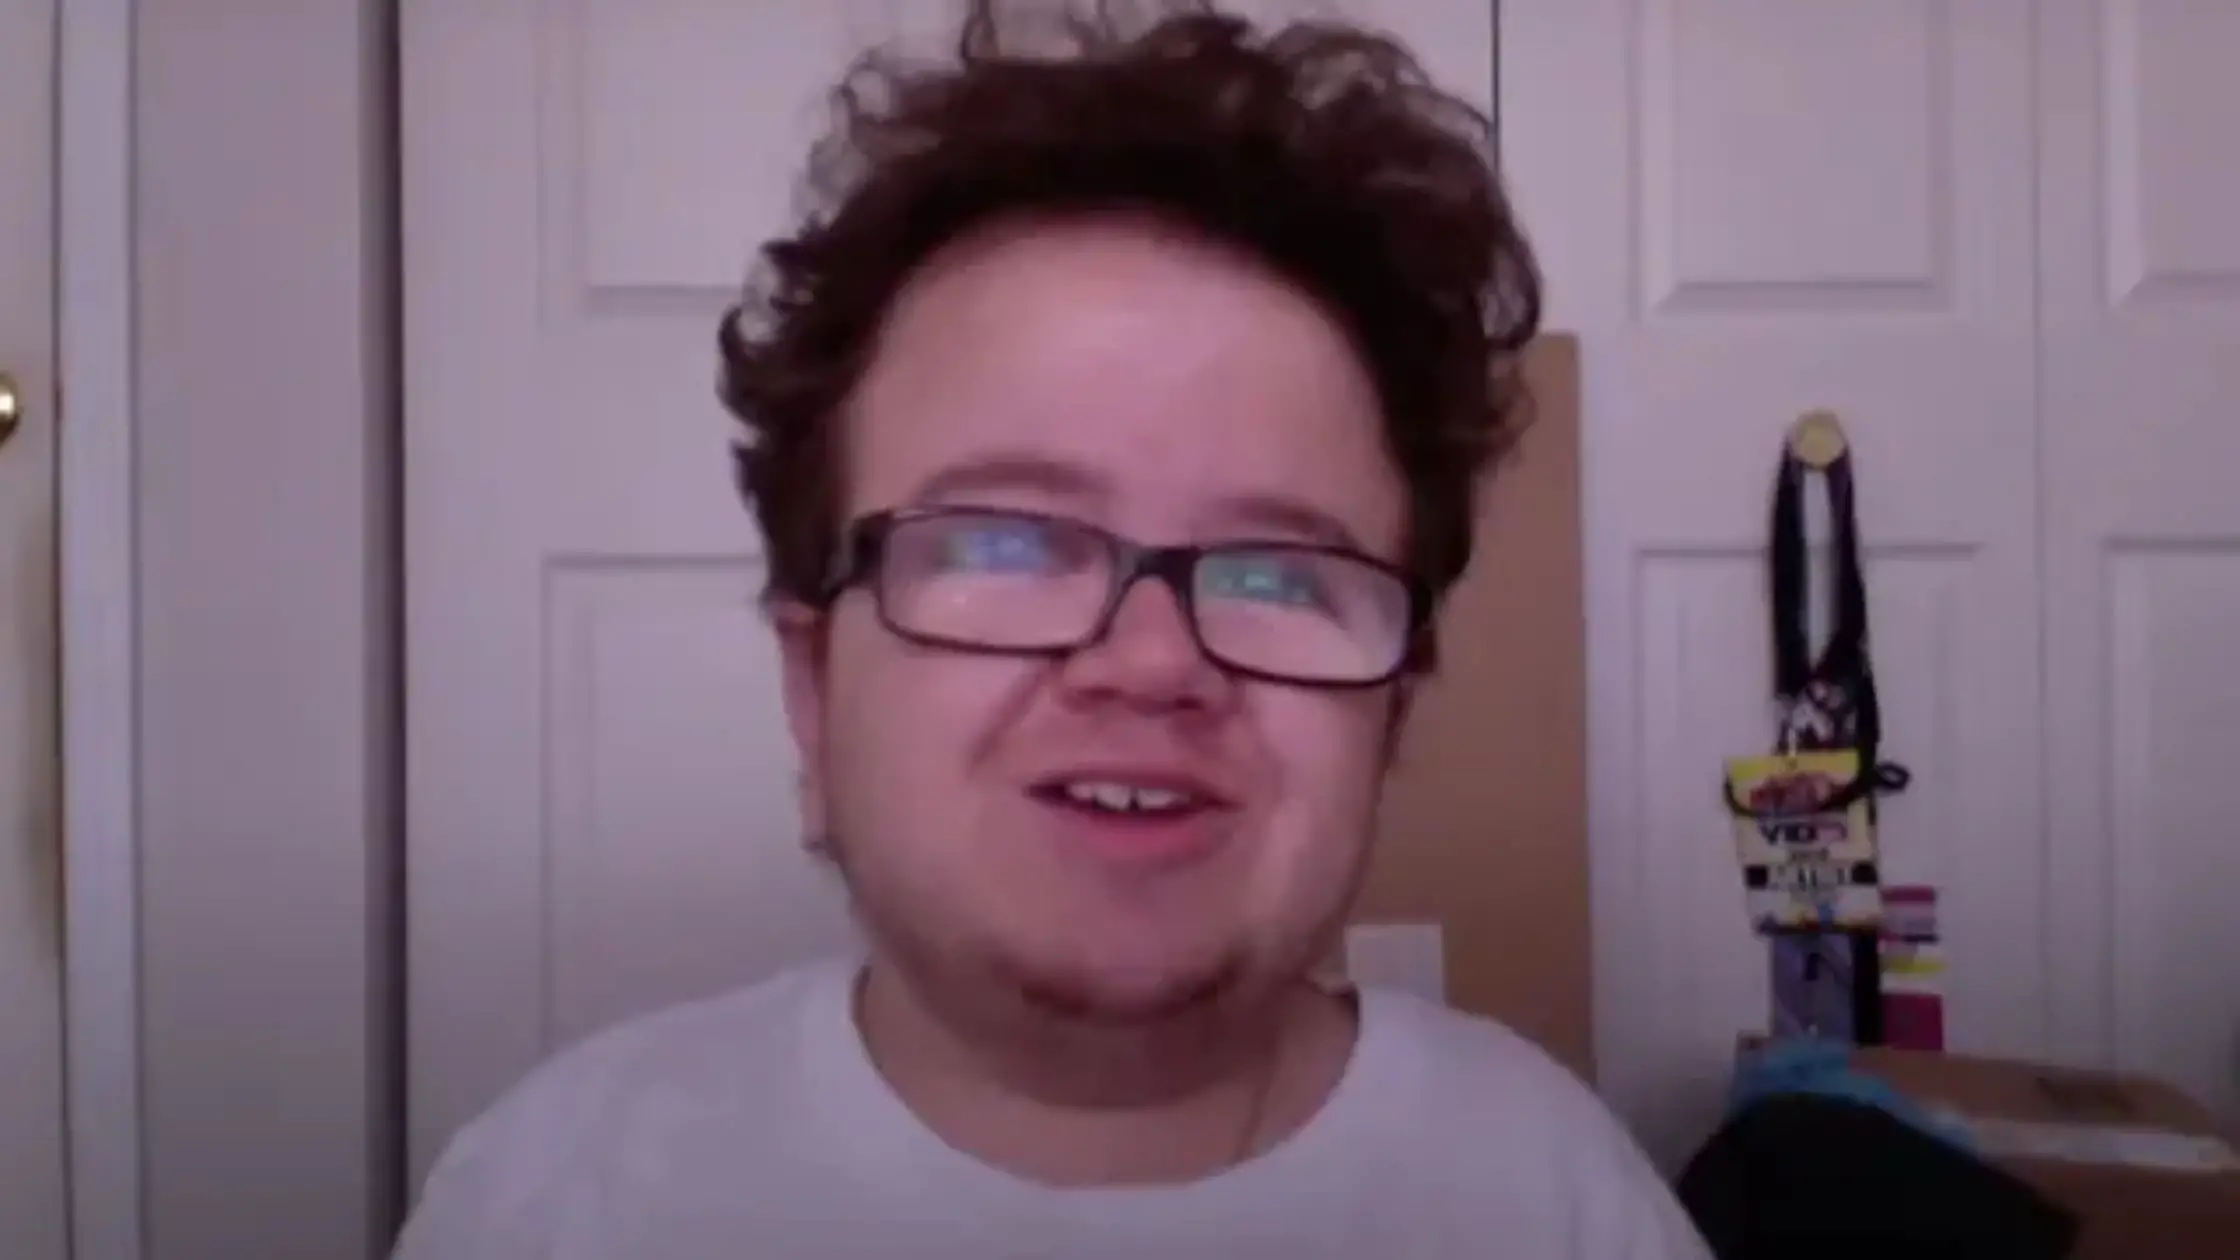 youtuber-keenan-cahill-dies-at-the-age-of-27-after-heart-surgery